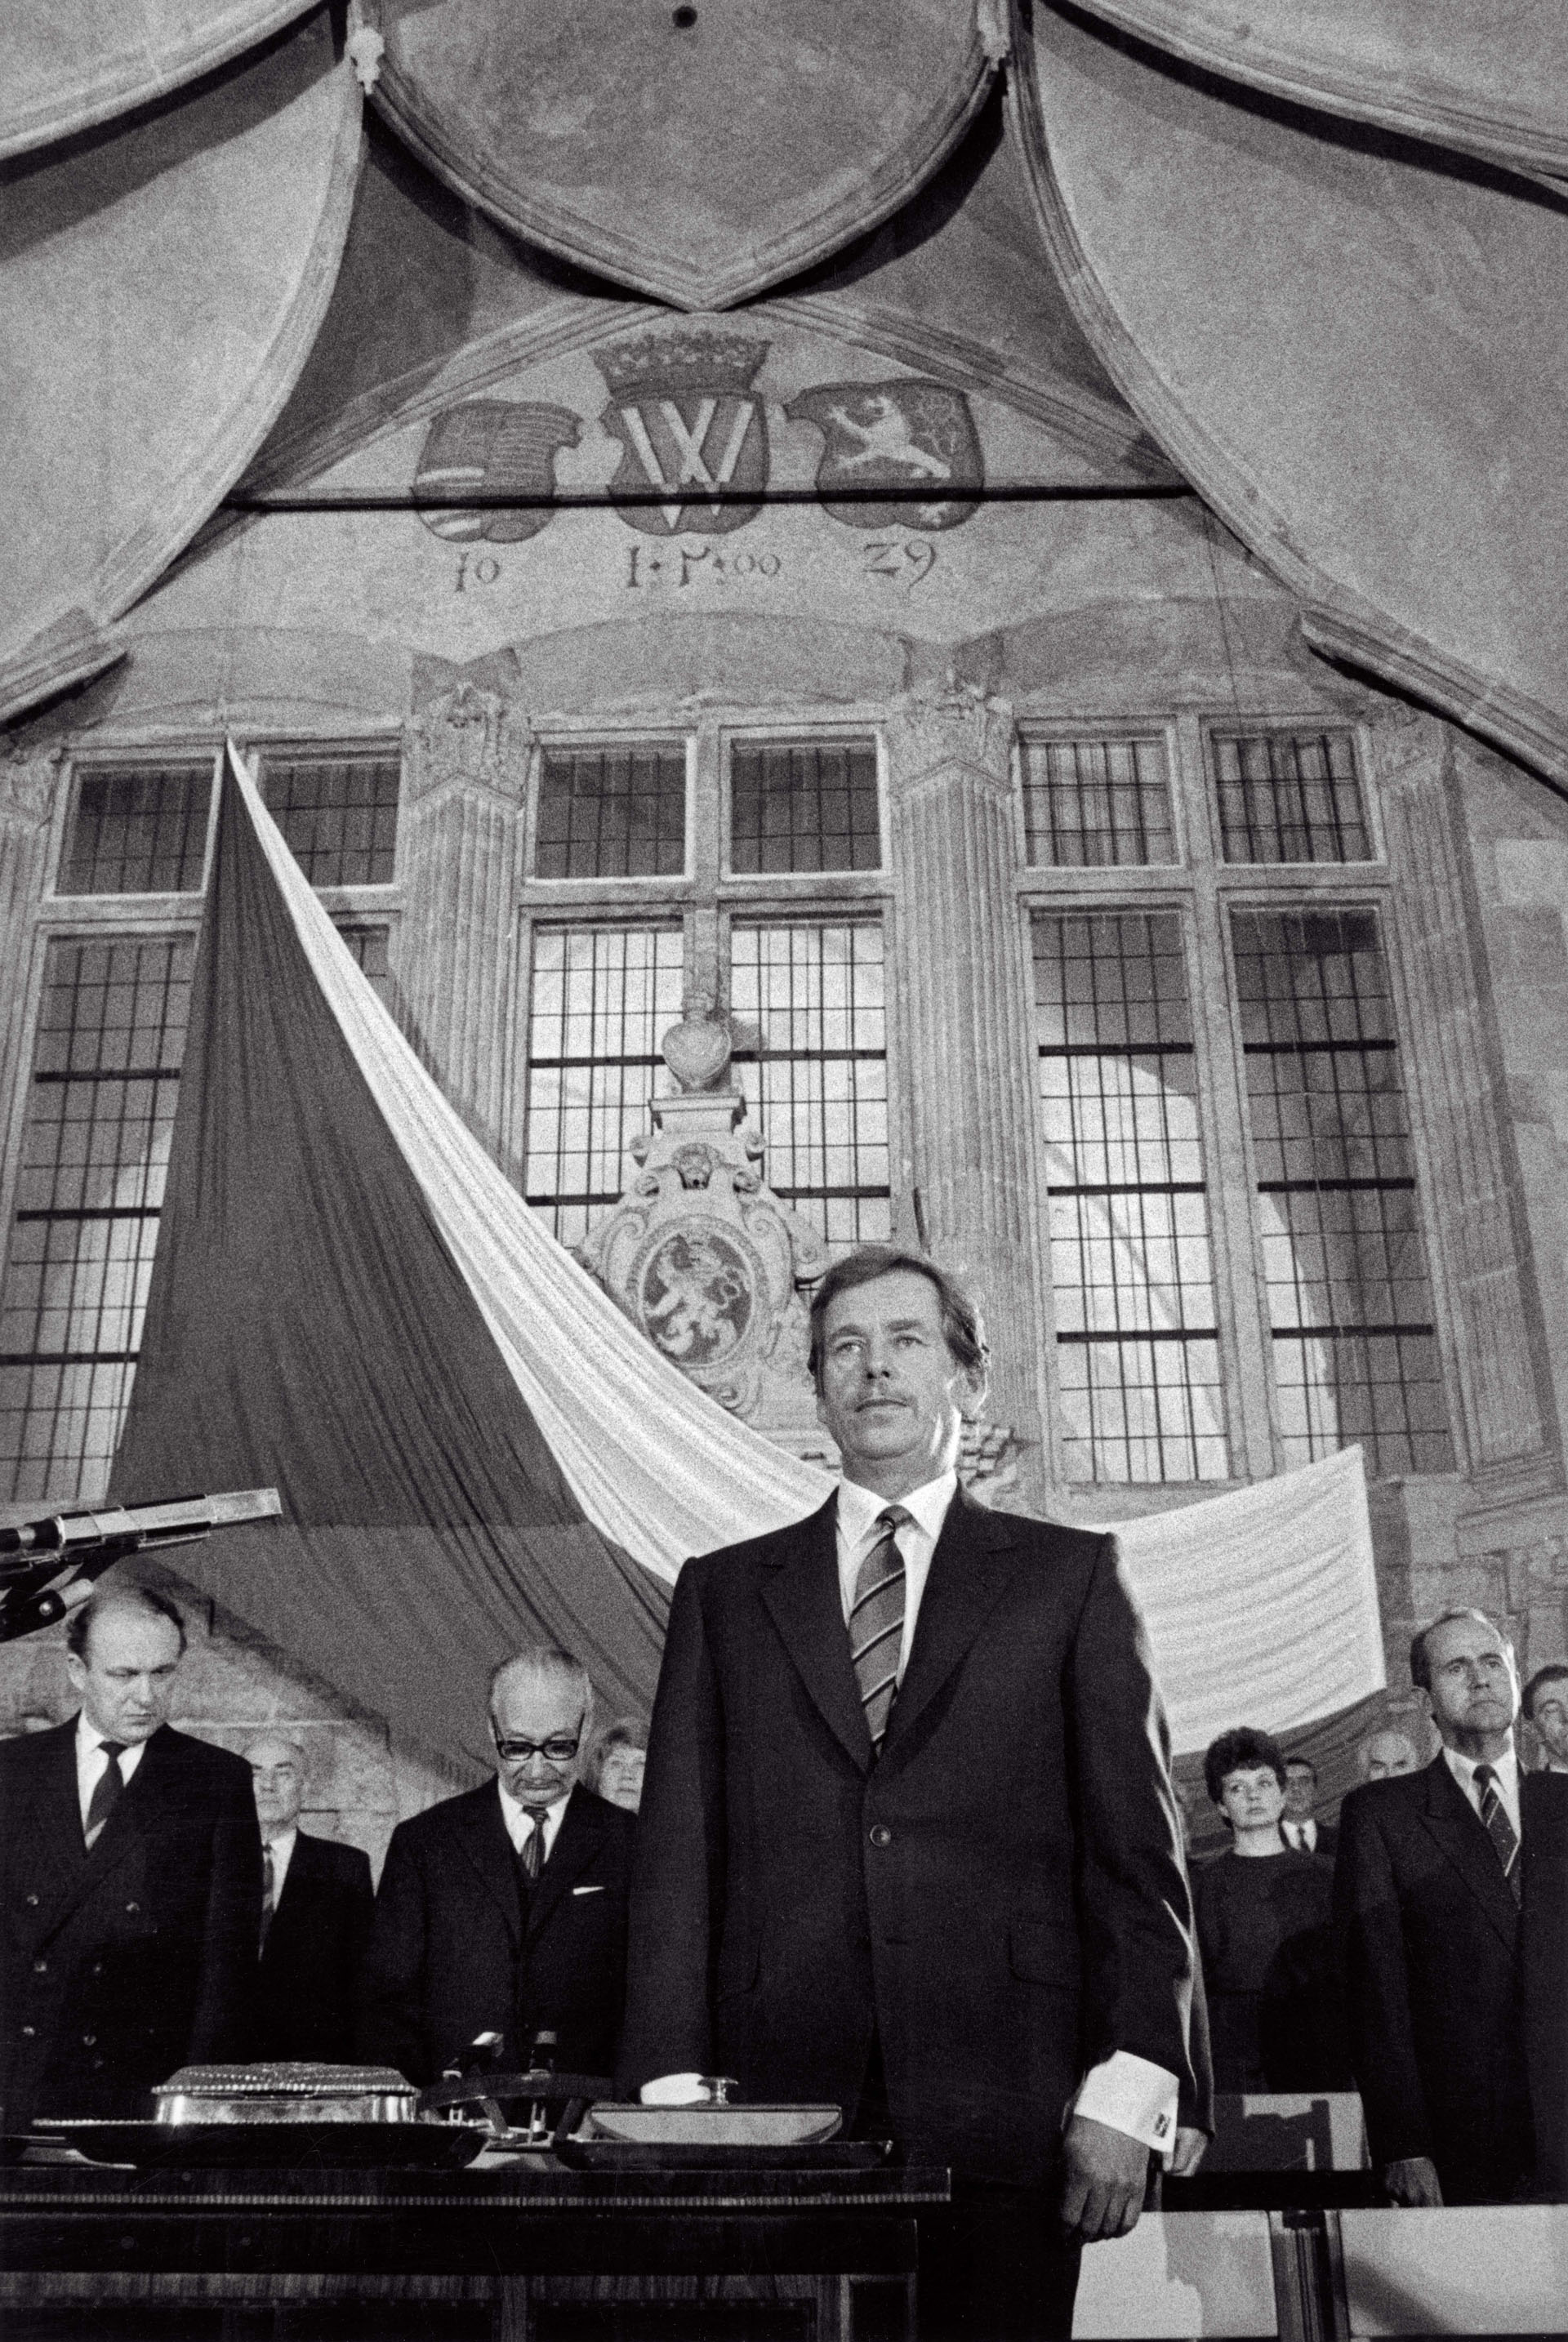 Meeting in the Vladislav Hall at Prague Castle, members of both houses of the Federal Assembly unanimously elected Václav Havel president.  Prague, December 29, 1989. Image: Pavel Štecha